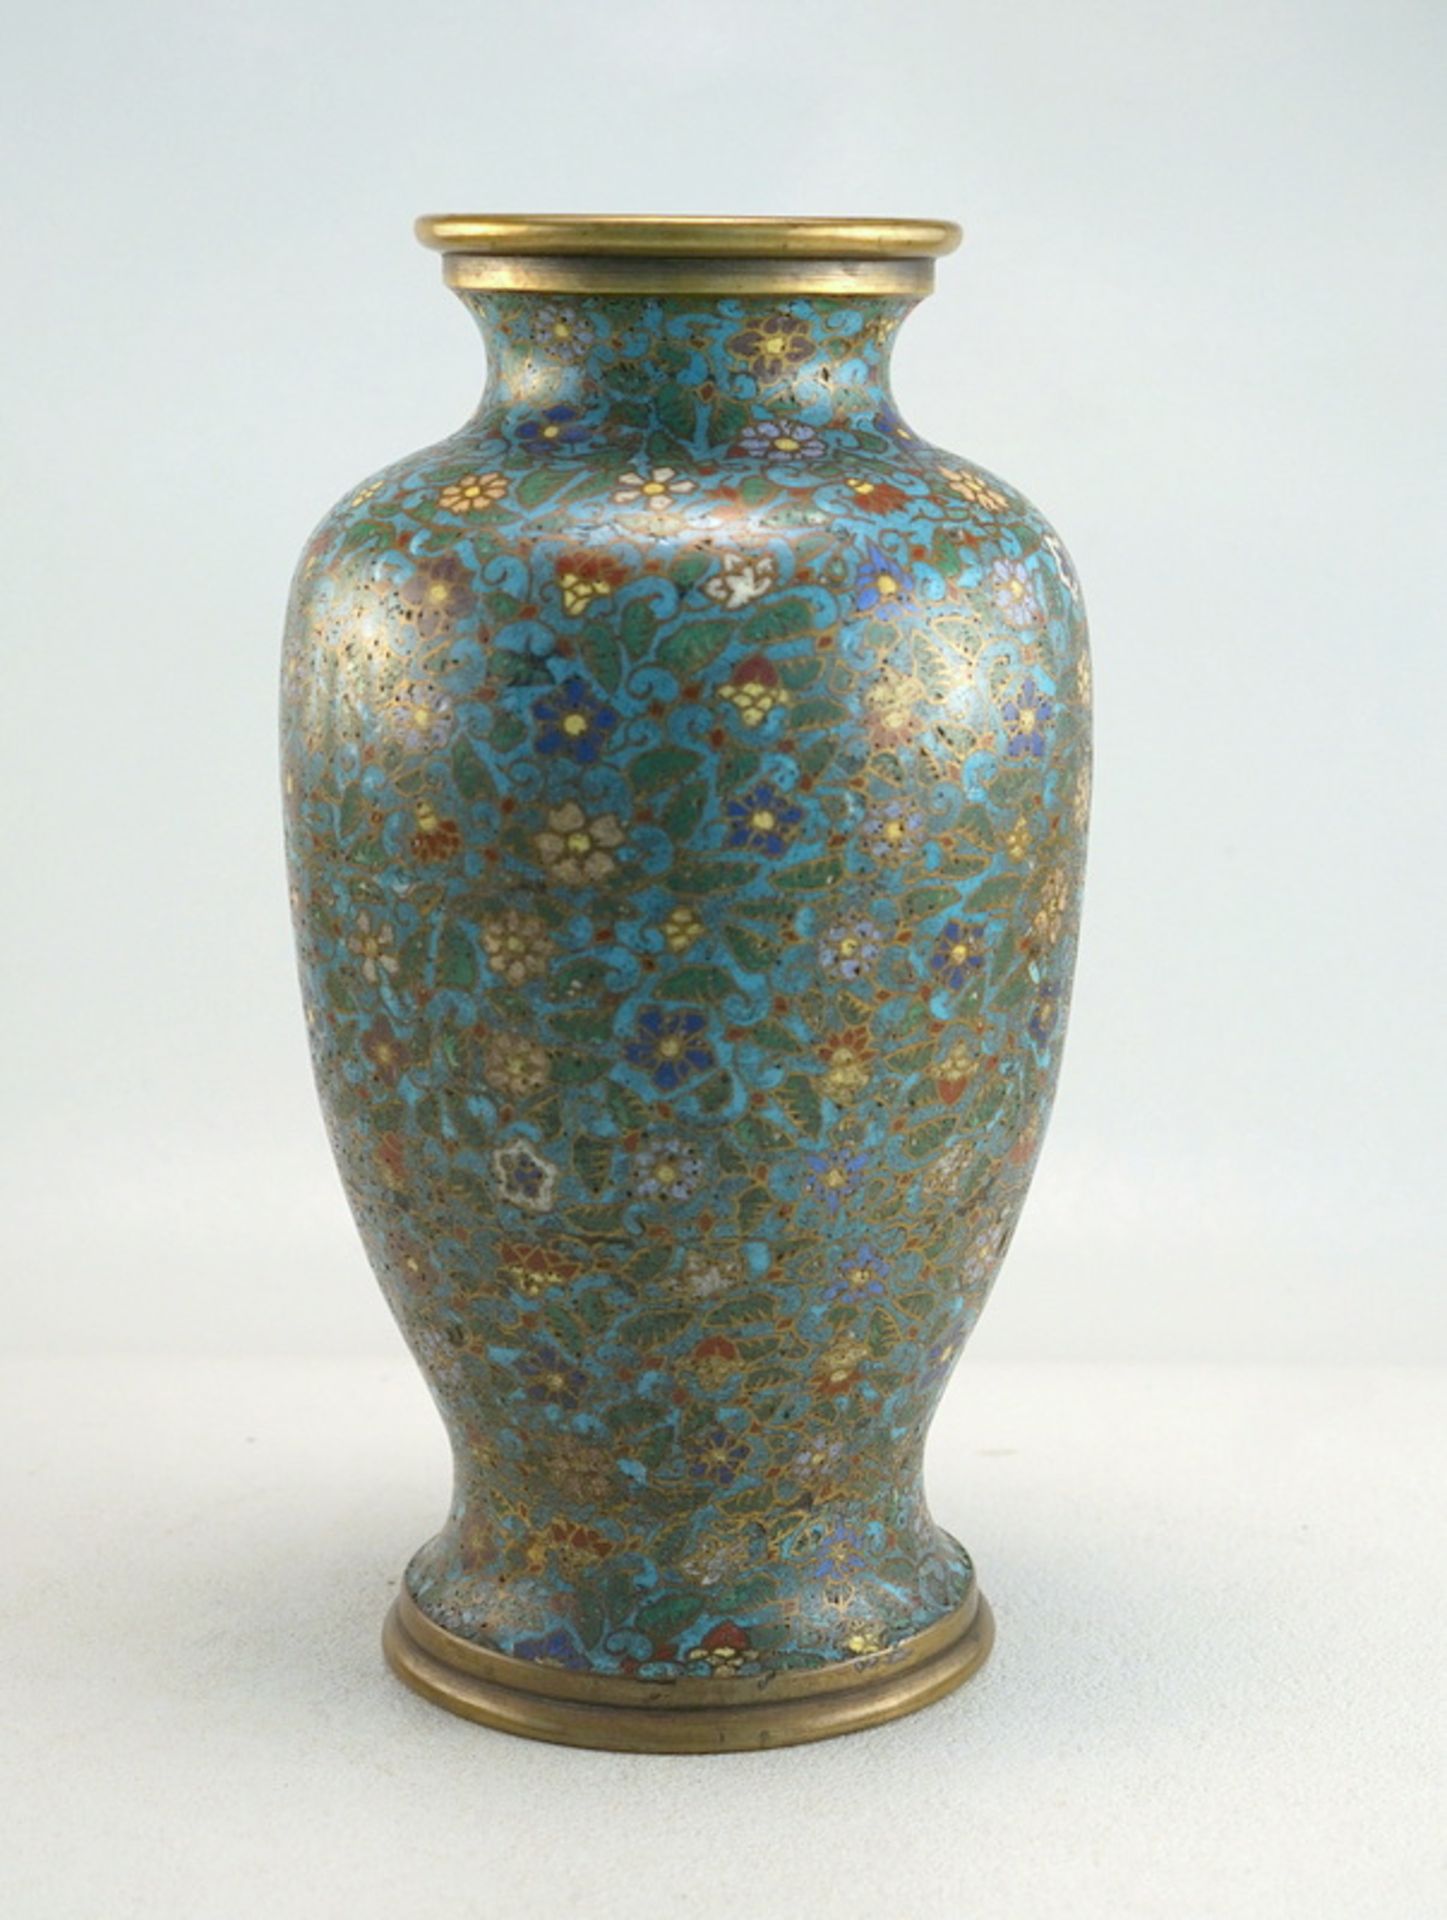 Cloissonnée Balustervase, Chien-Lung Period - Image 2 of 6